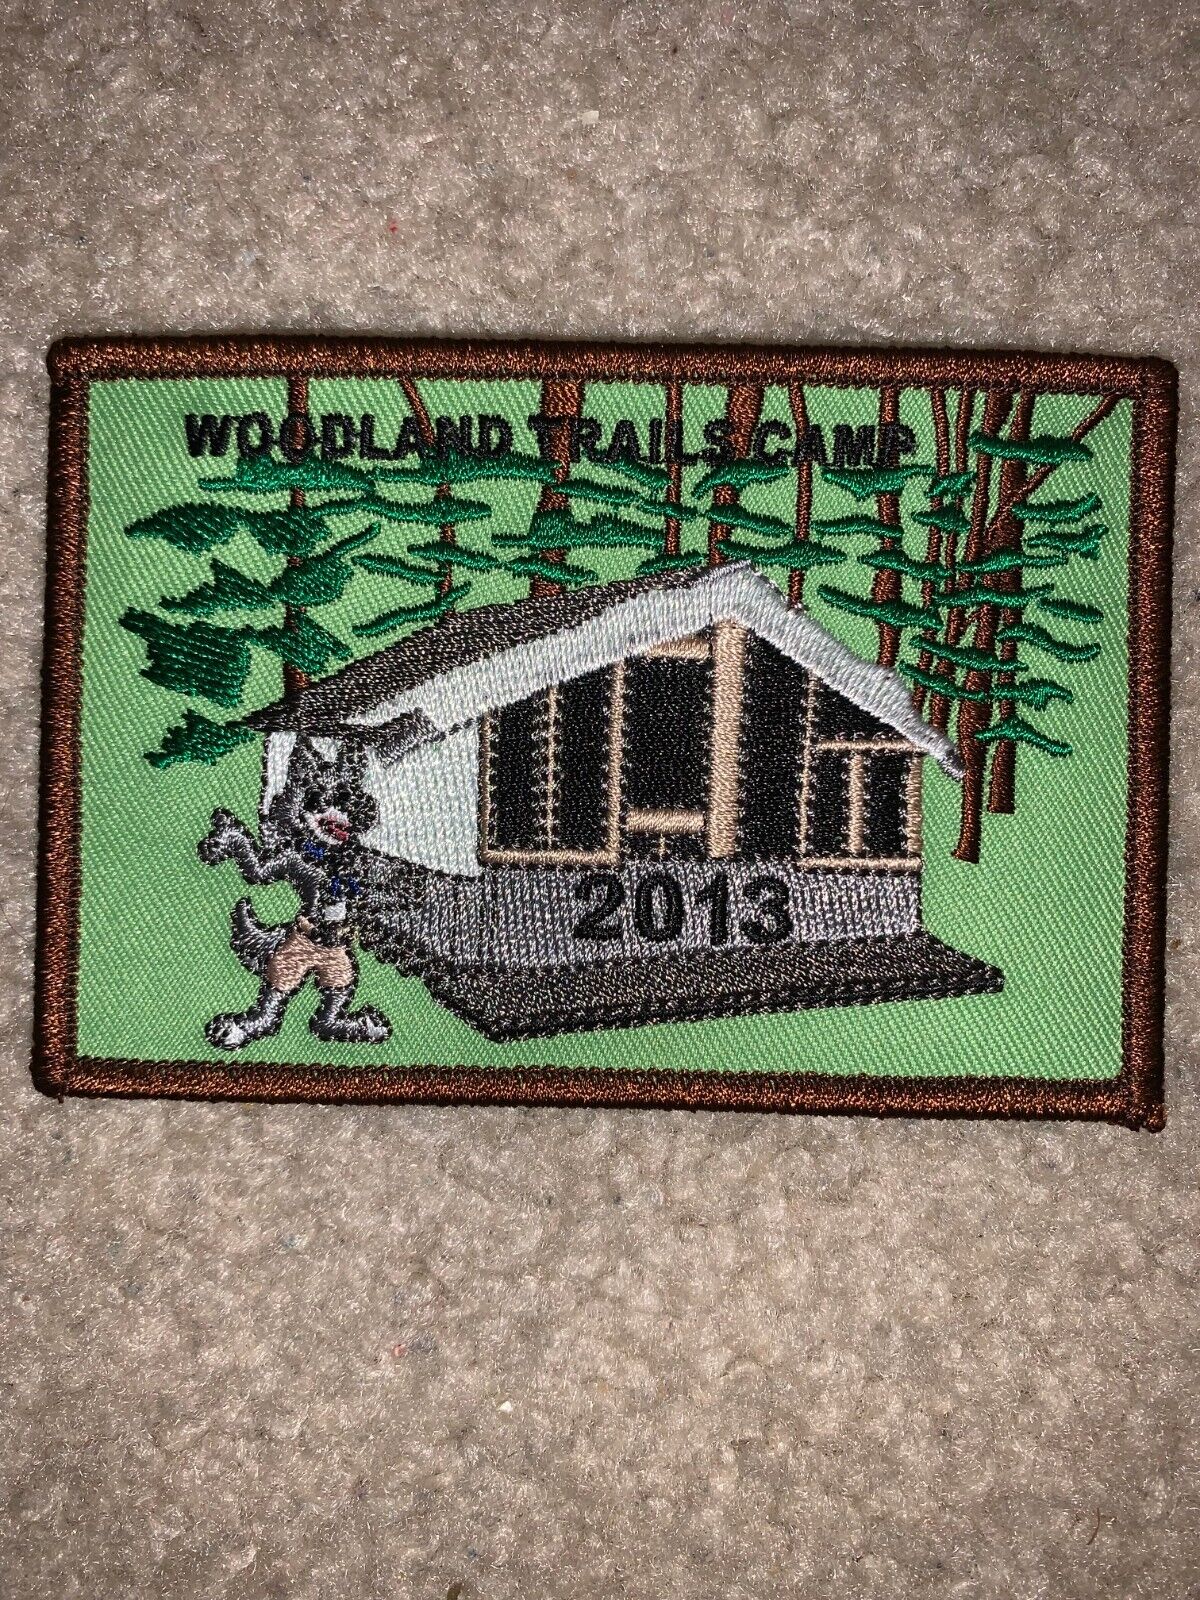 Boy Scout 2013 Camp Woodland Trails Greater Toronto Region Scouts Canada Patch